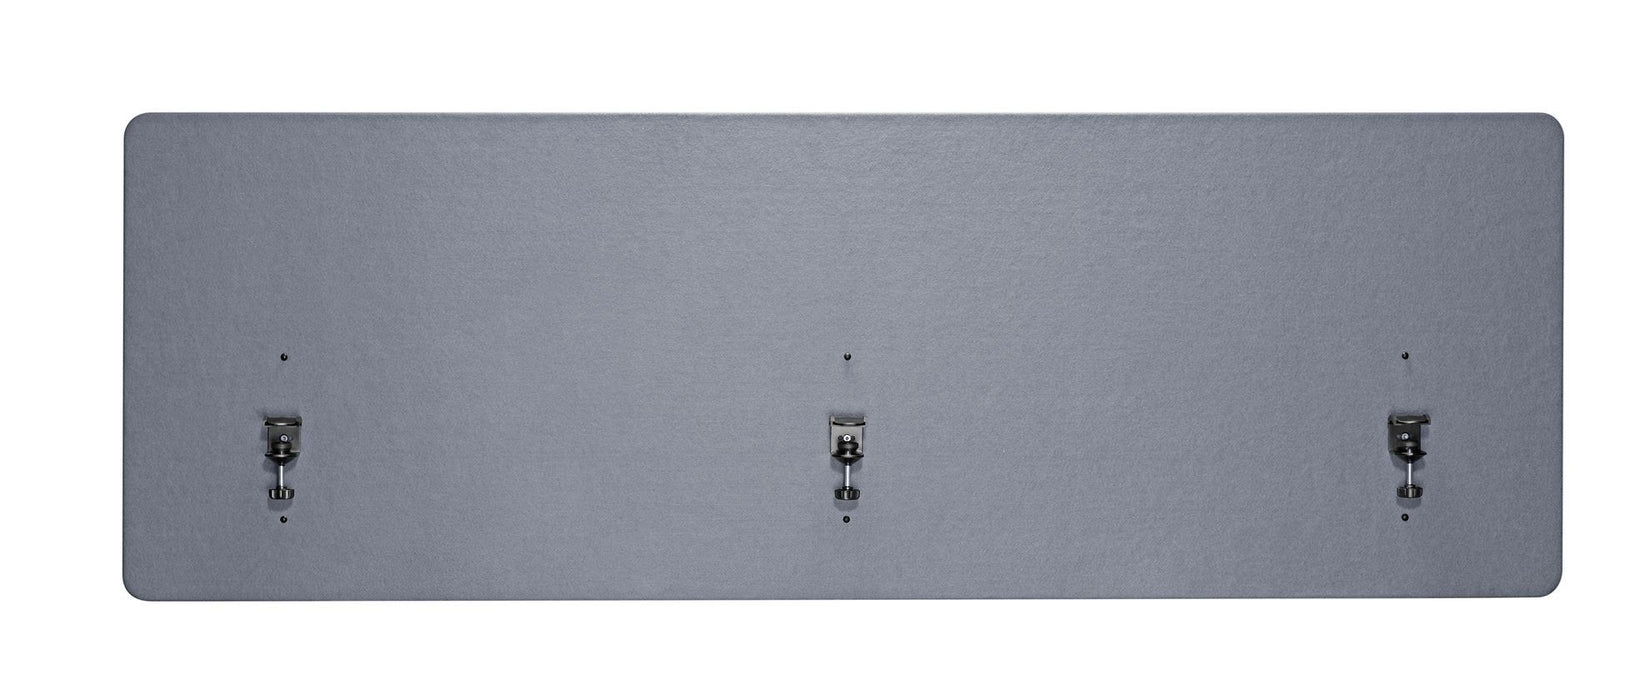 BRATECK 1.8m Desktop Privacy Panel with 3x Heavy-Duty Clamps. Felt Surface to Re